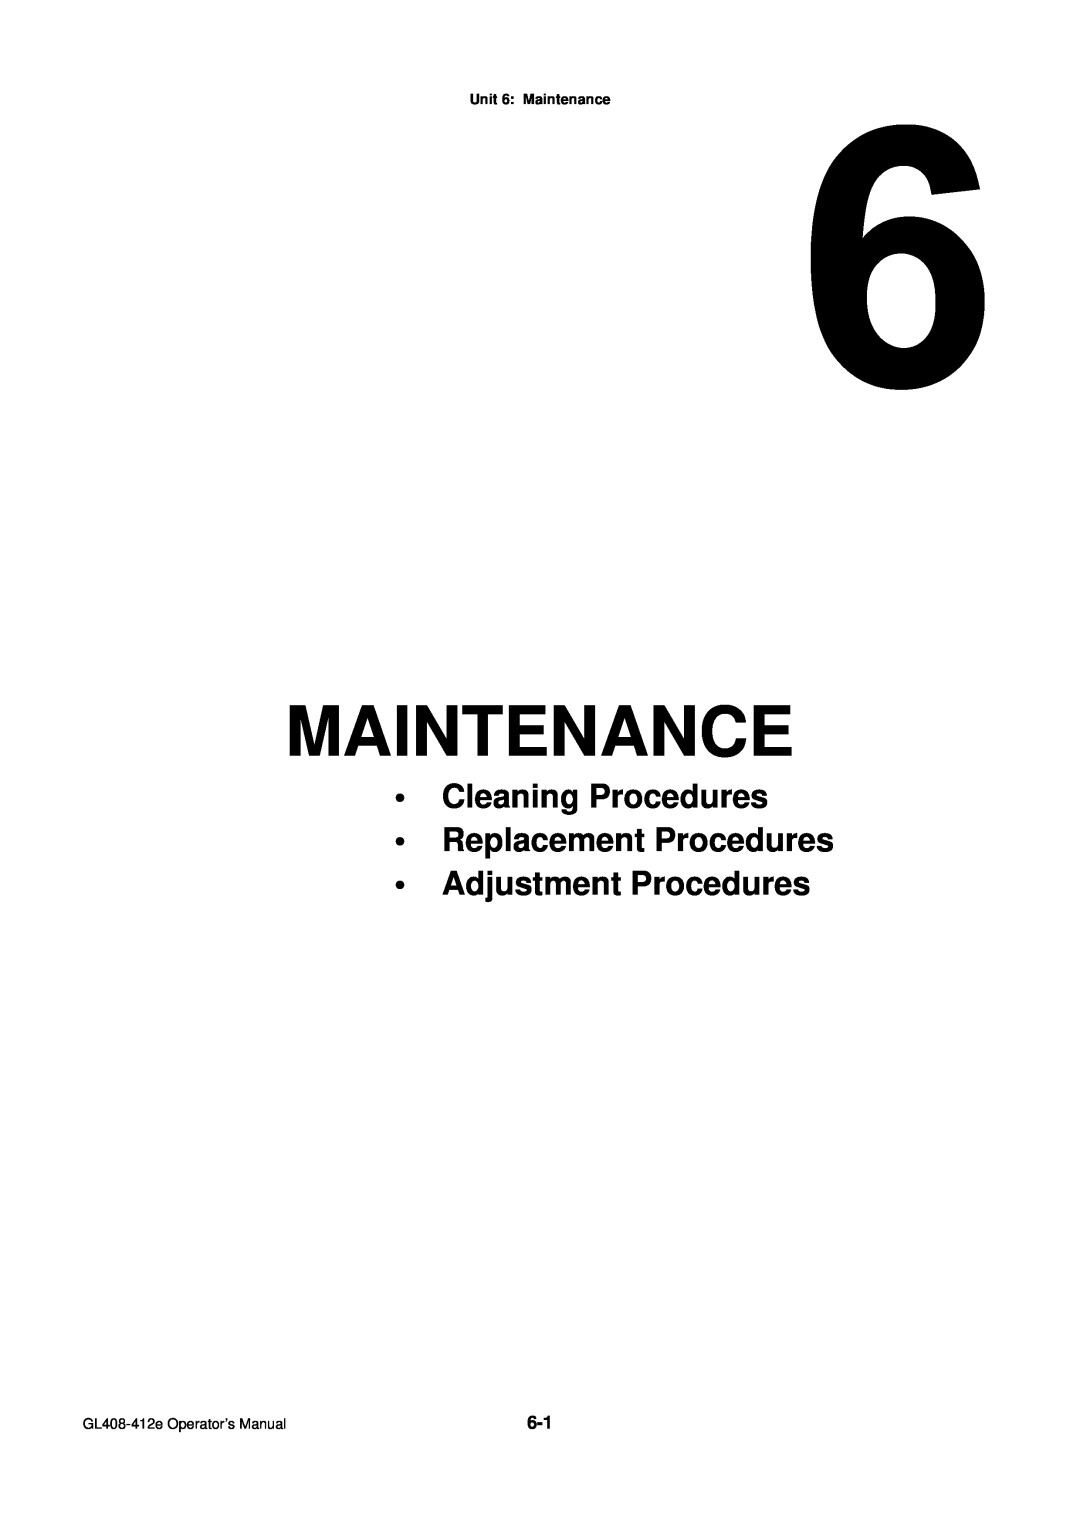 SATO GL4XXE manual Cleaning Procedures Replacement Procedures Adjustment Procedures, Unit 6 Maintenance 